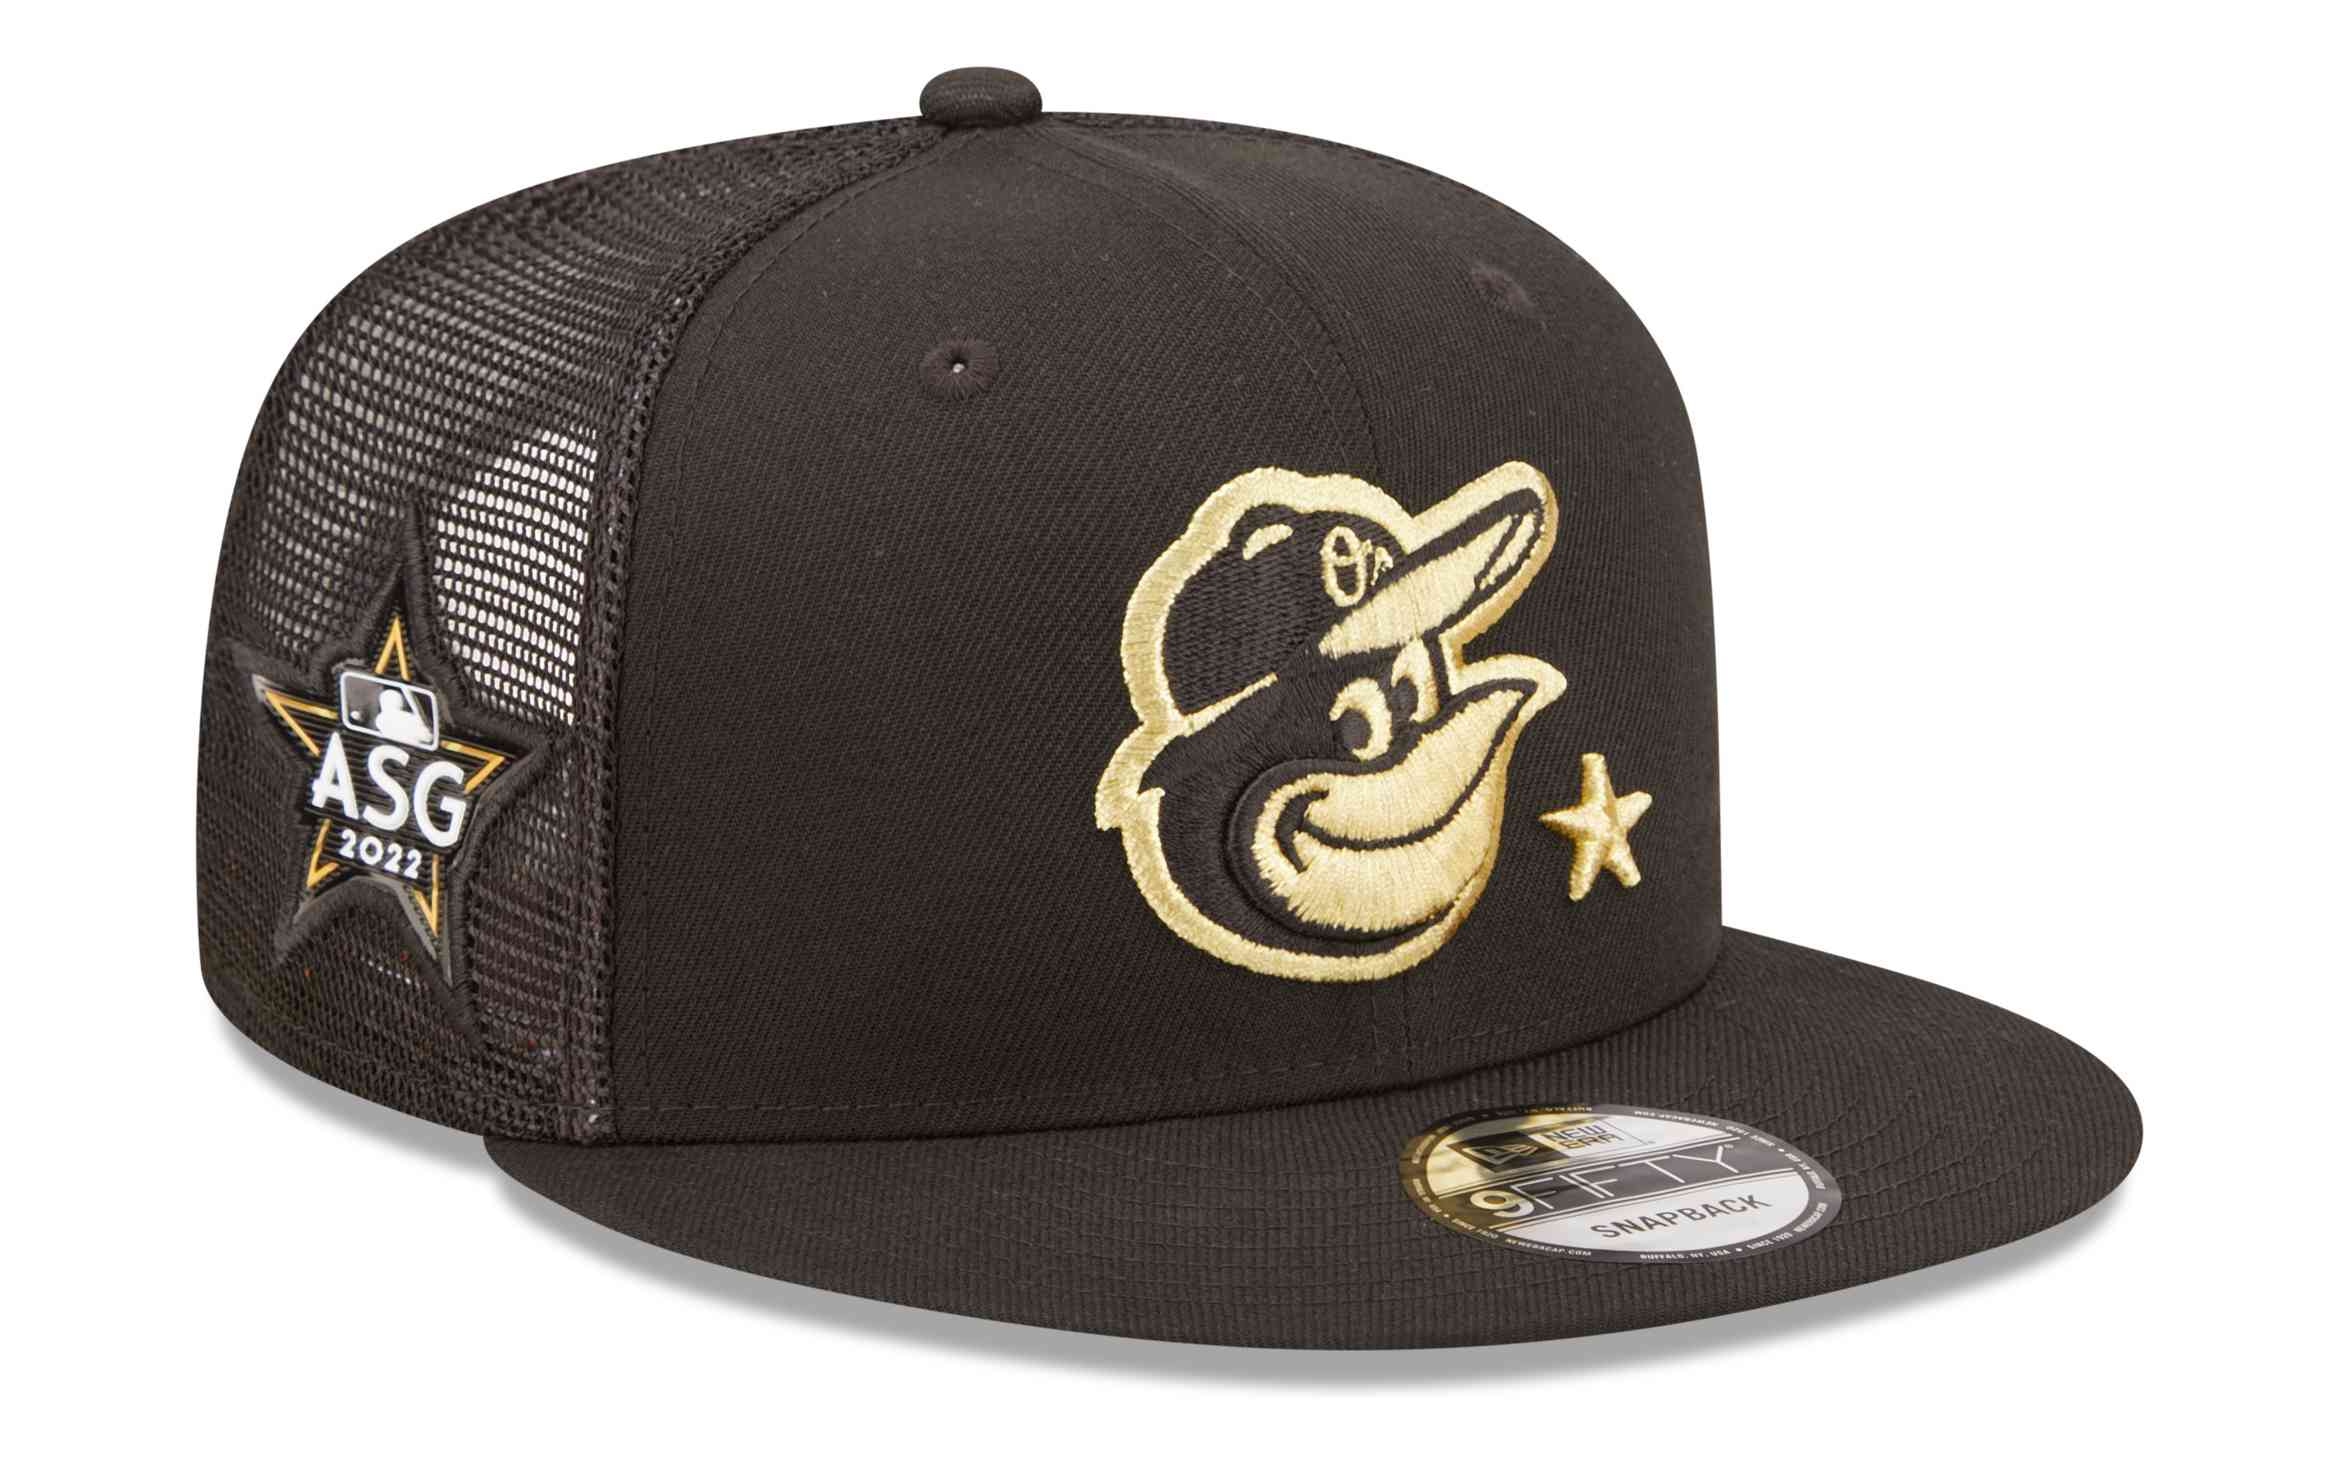 New Era - MLB Baltimore Orioles All Star Game Patch 9Fifty